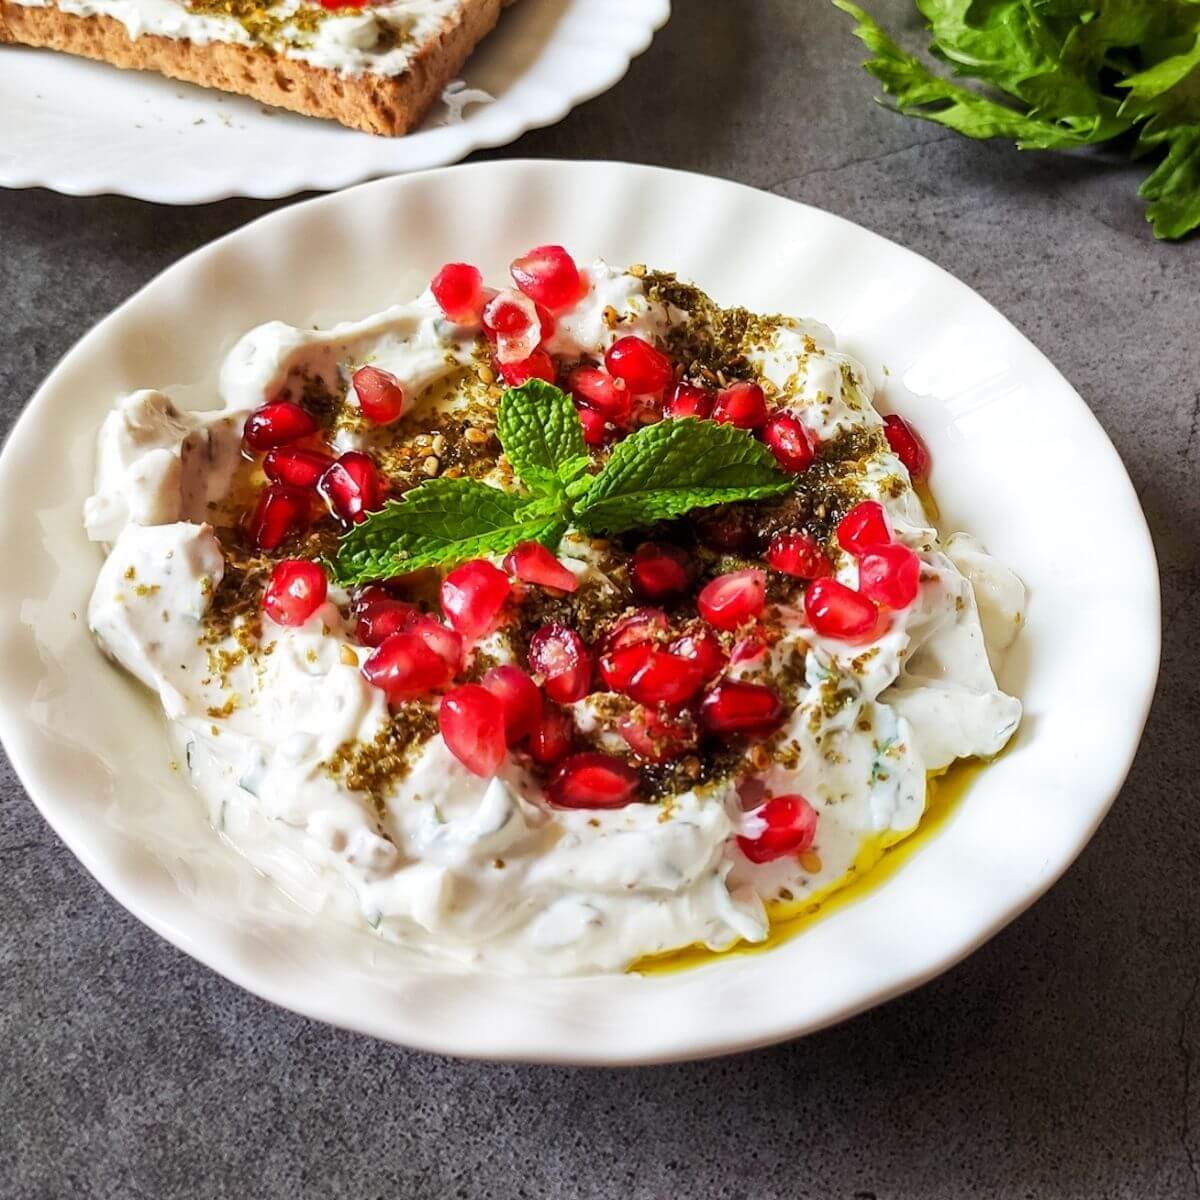 Labneh dip with za’atar - A quick & easy Middle Eastern dip